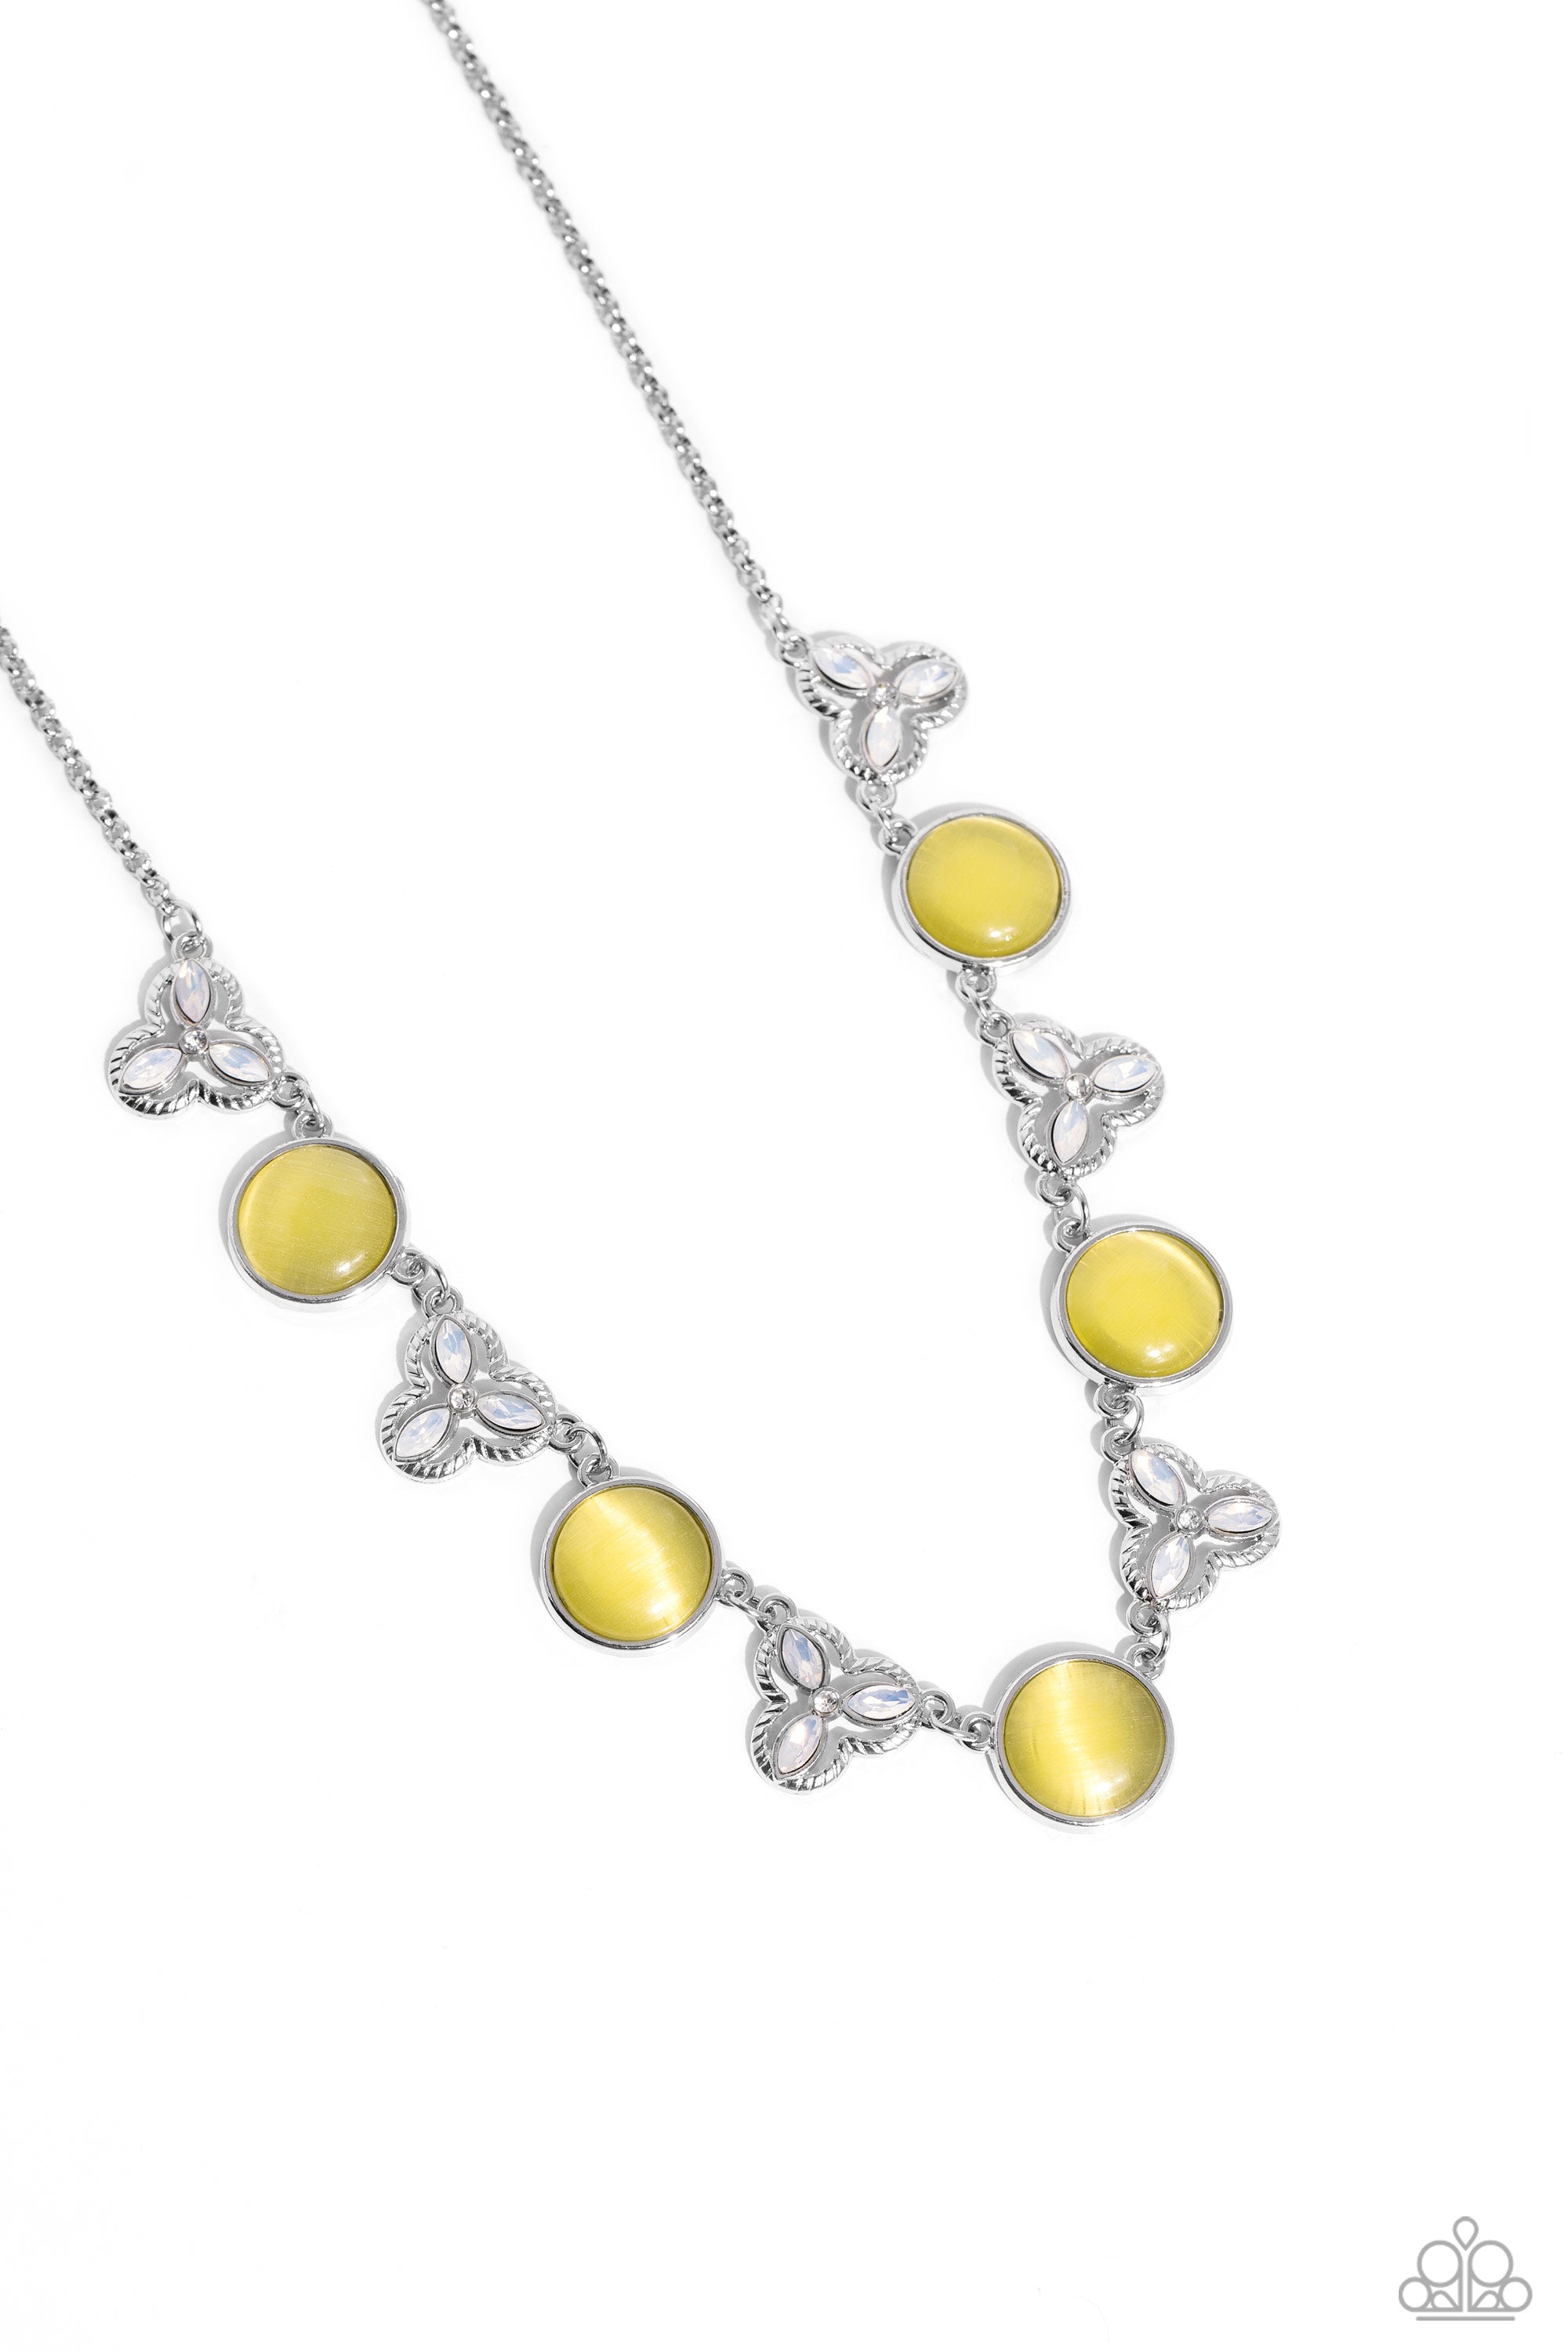 Floral Crowned Yellow Cat's Eye Stone Necklace - Paparazzi Accessories- lightbox - CarasShop.com - $5 Jewelry by Cara Jewels